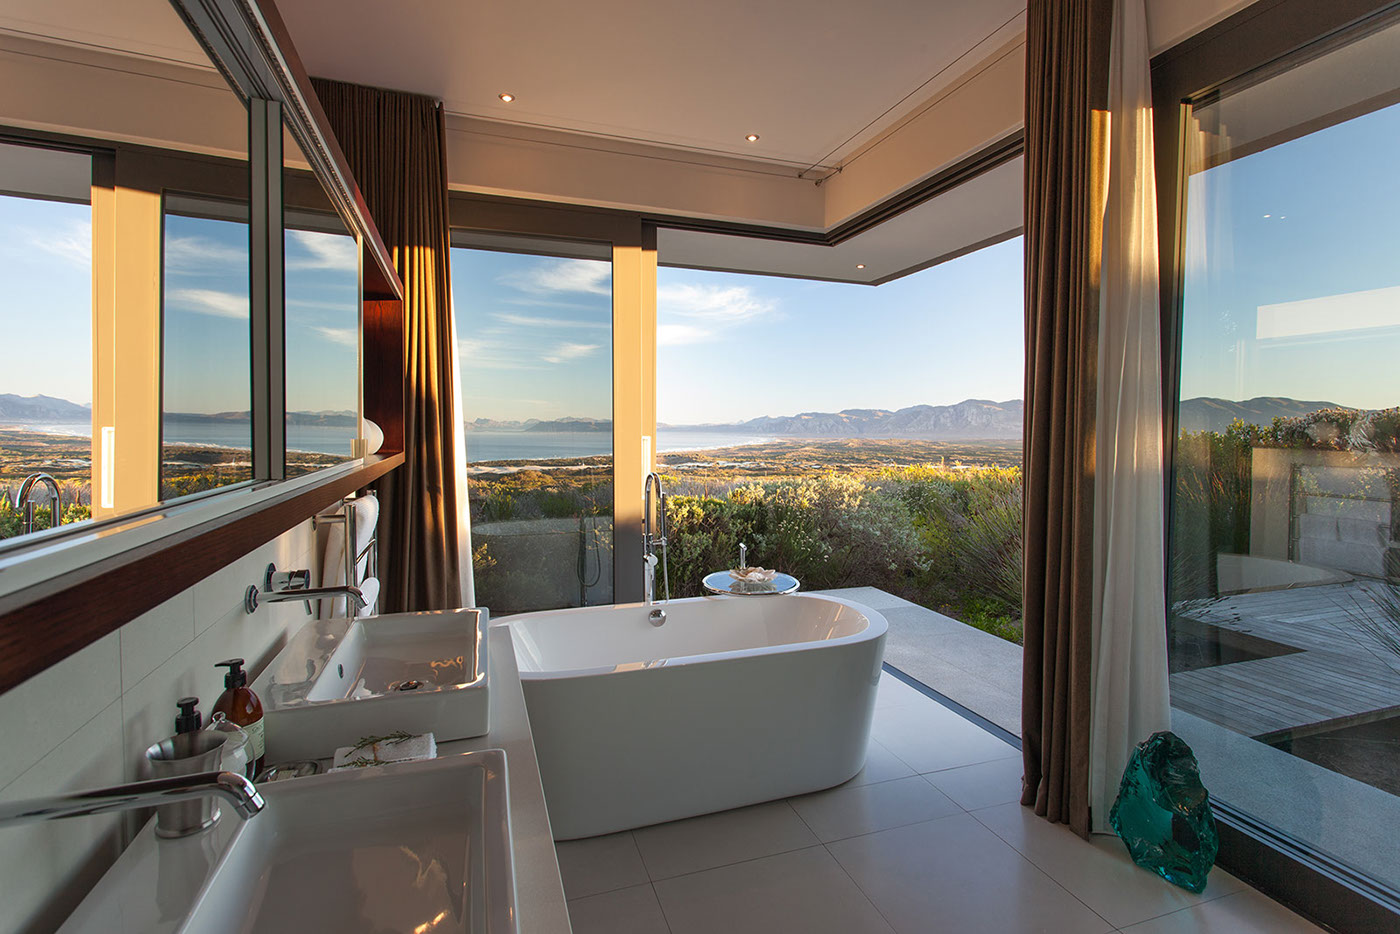 destination Travel south africa conservation sustainable tourism hotel Hospitality luxury resort